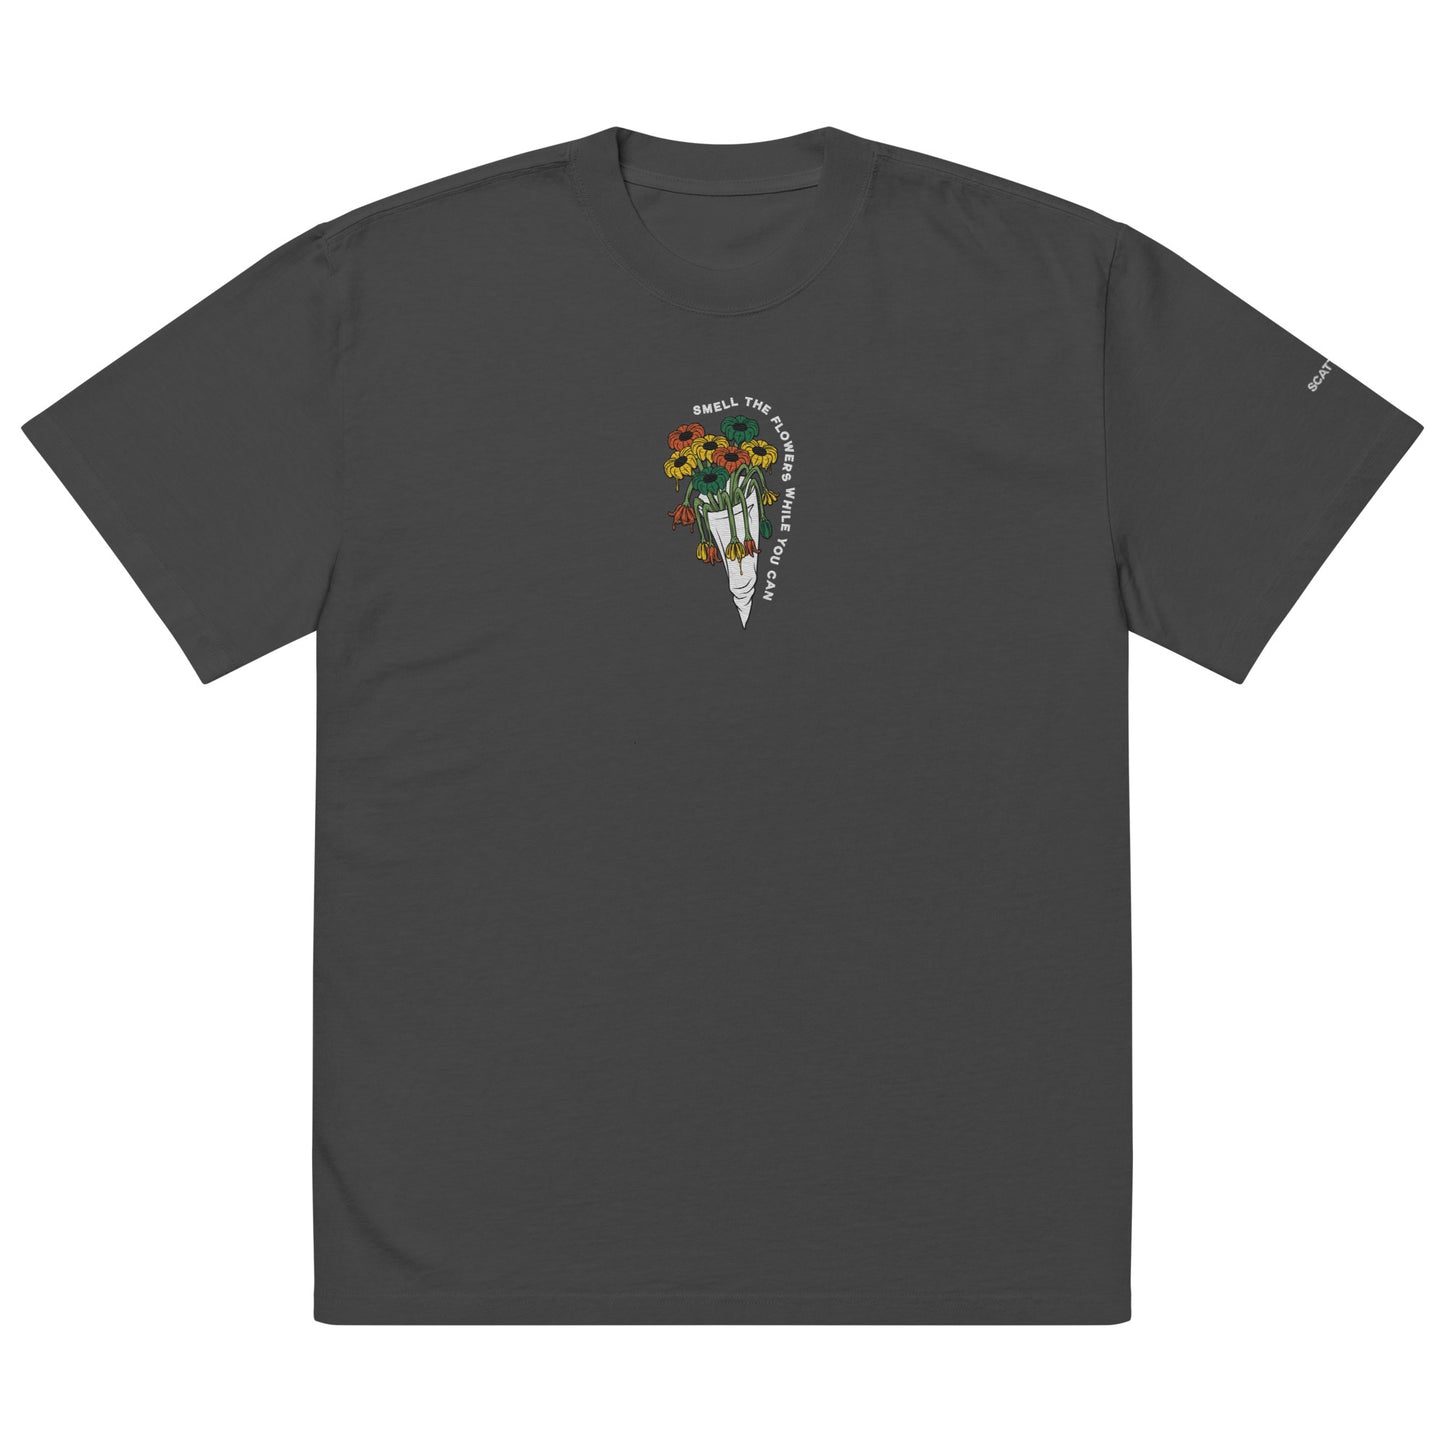 Scattered x Dripped Gawd Smell the Flowers Embroidered Faded T-shirt